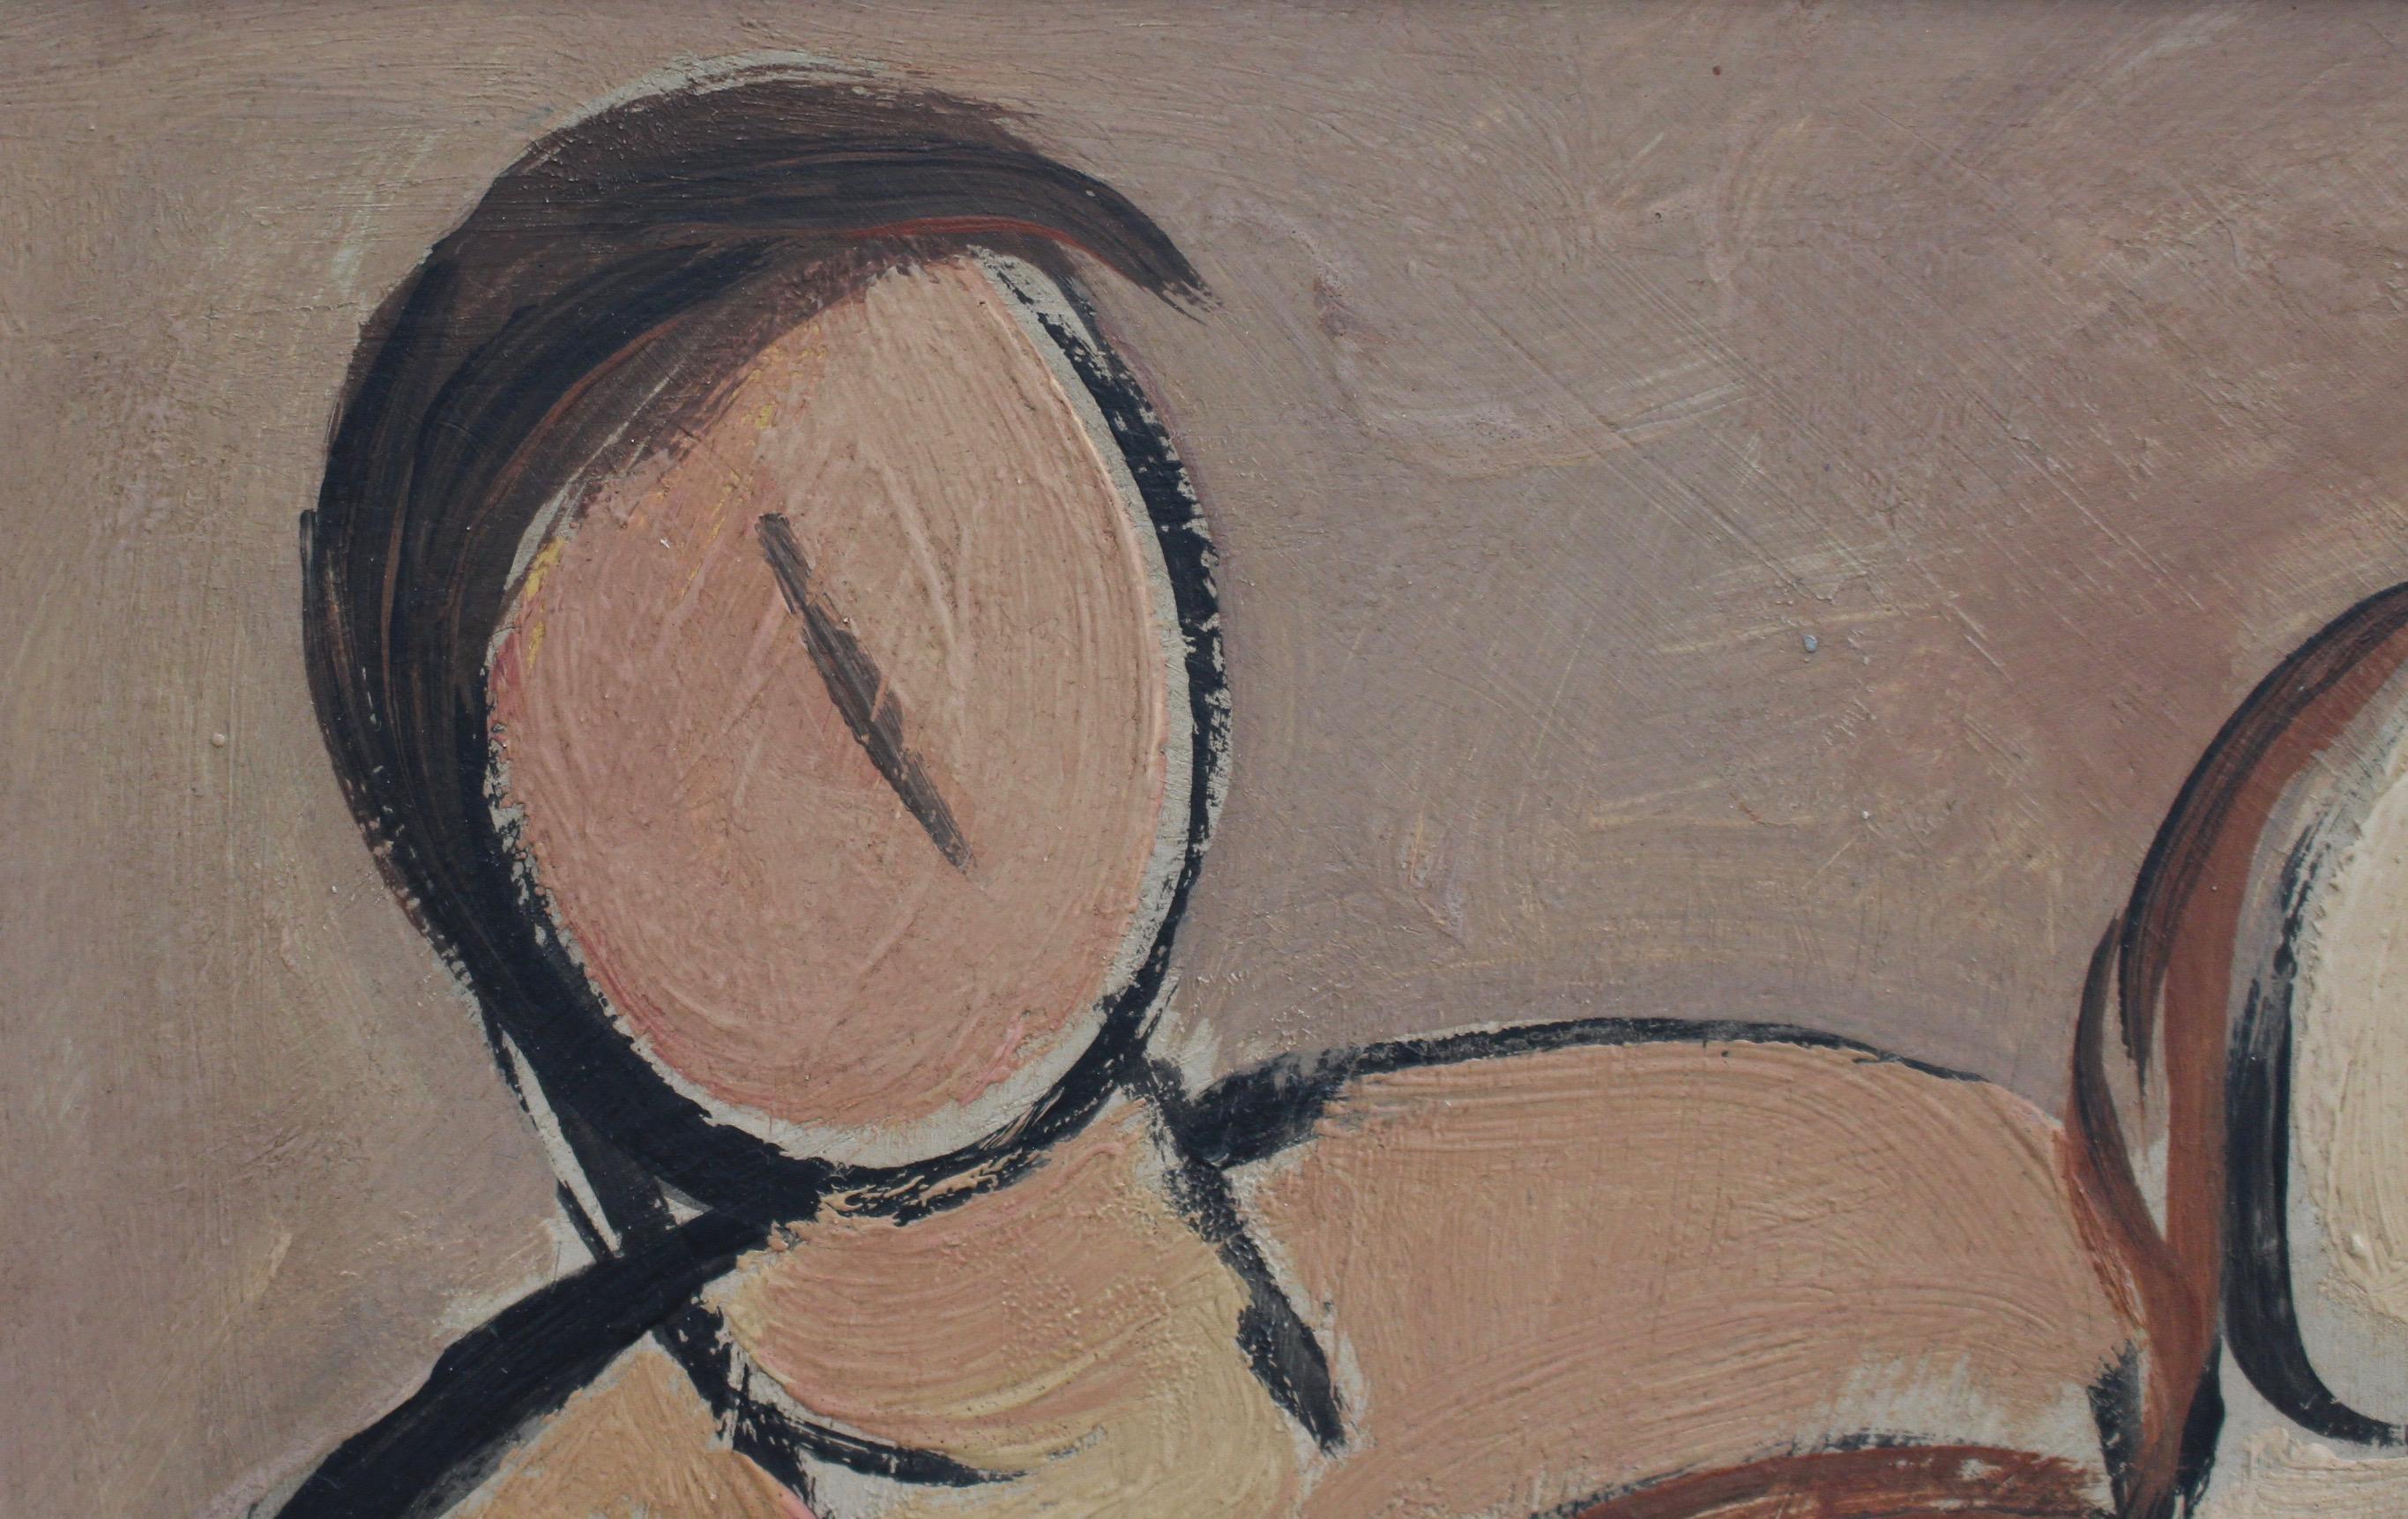 'Portrait of Seated Nudes', oil on board, by STM (circa 1940s - 1960s). STM has created another irresistible portrait using hallmark subtle earth hues. The backdrop is a solid field of light brown with a soupçon of pink. The chair upon which they